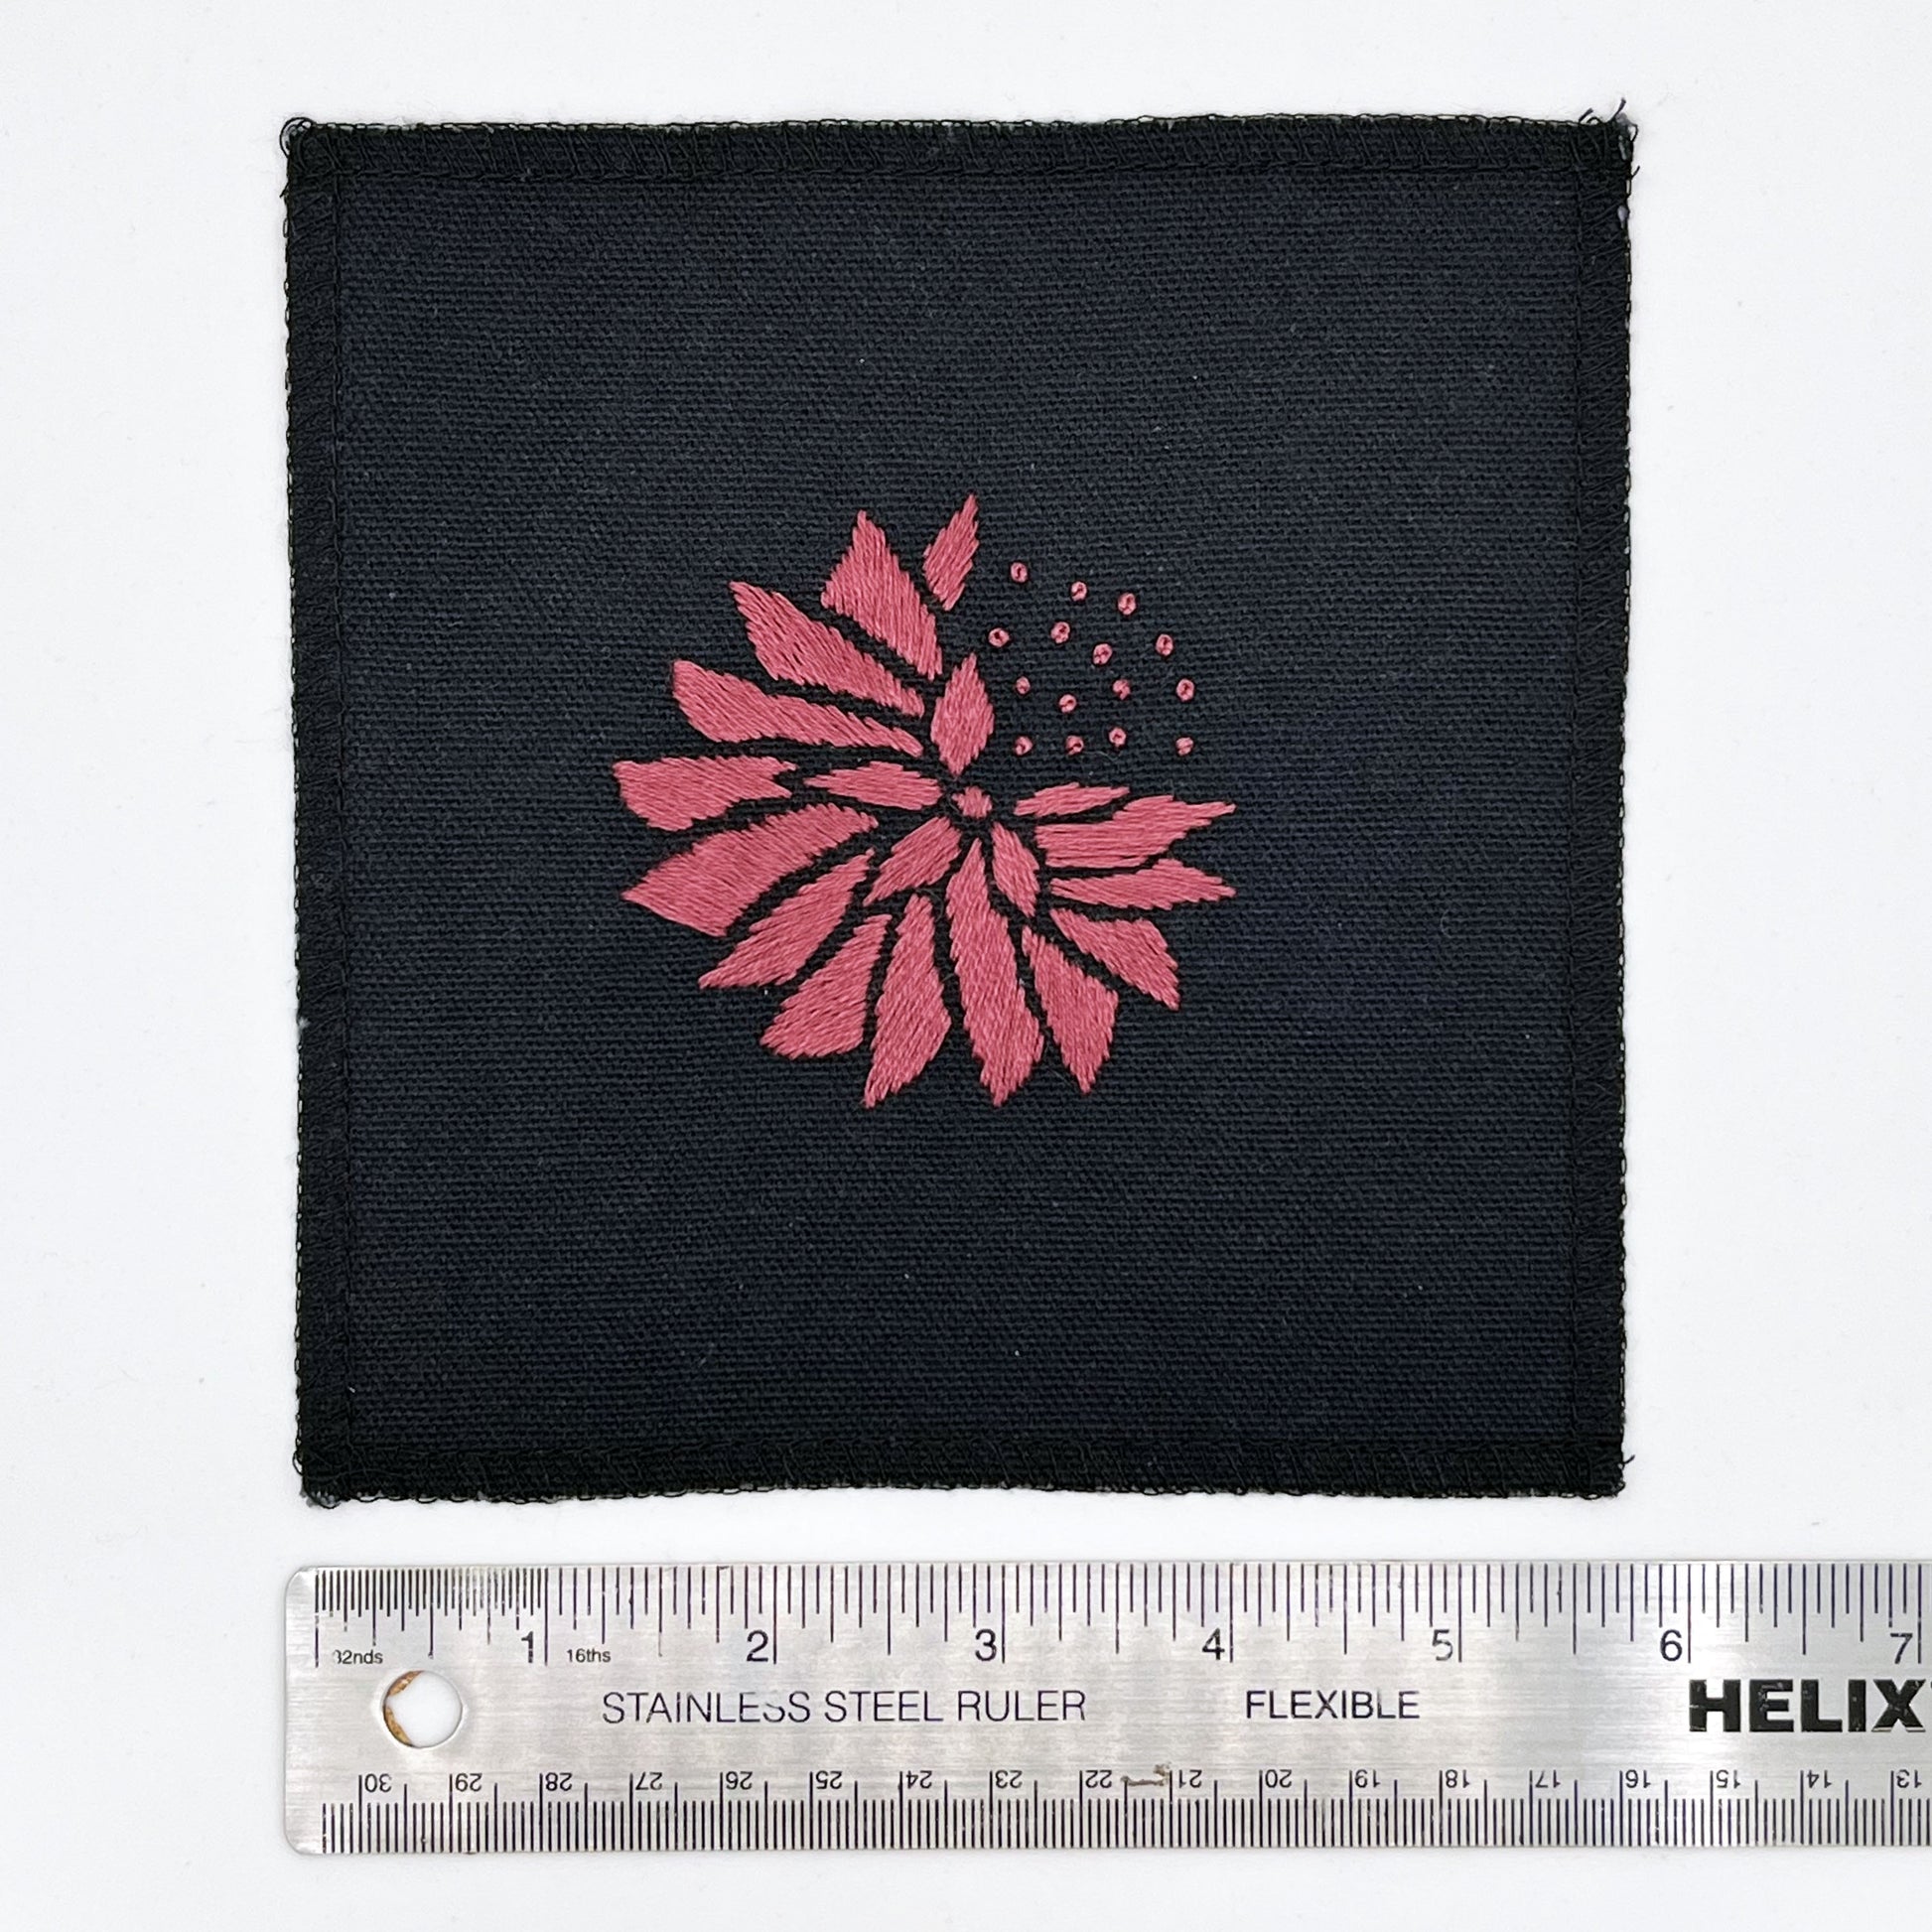 a square patch in black fabric, hand embroidered with a plum colored abstract dandelion made mostly of petals, with a quarter of them replaced with french knots, with overlocked edges, next to a metal ruler to show a width of six inches